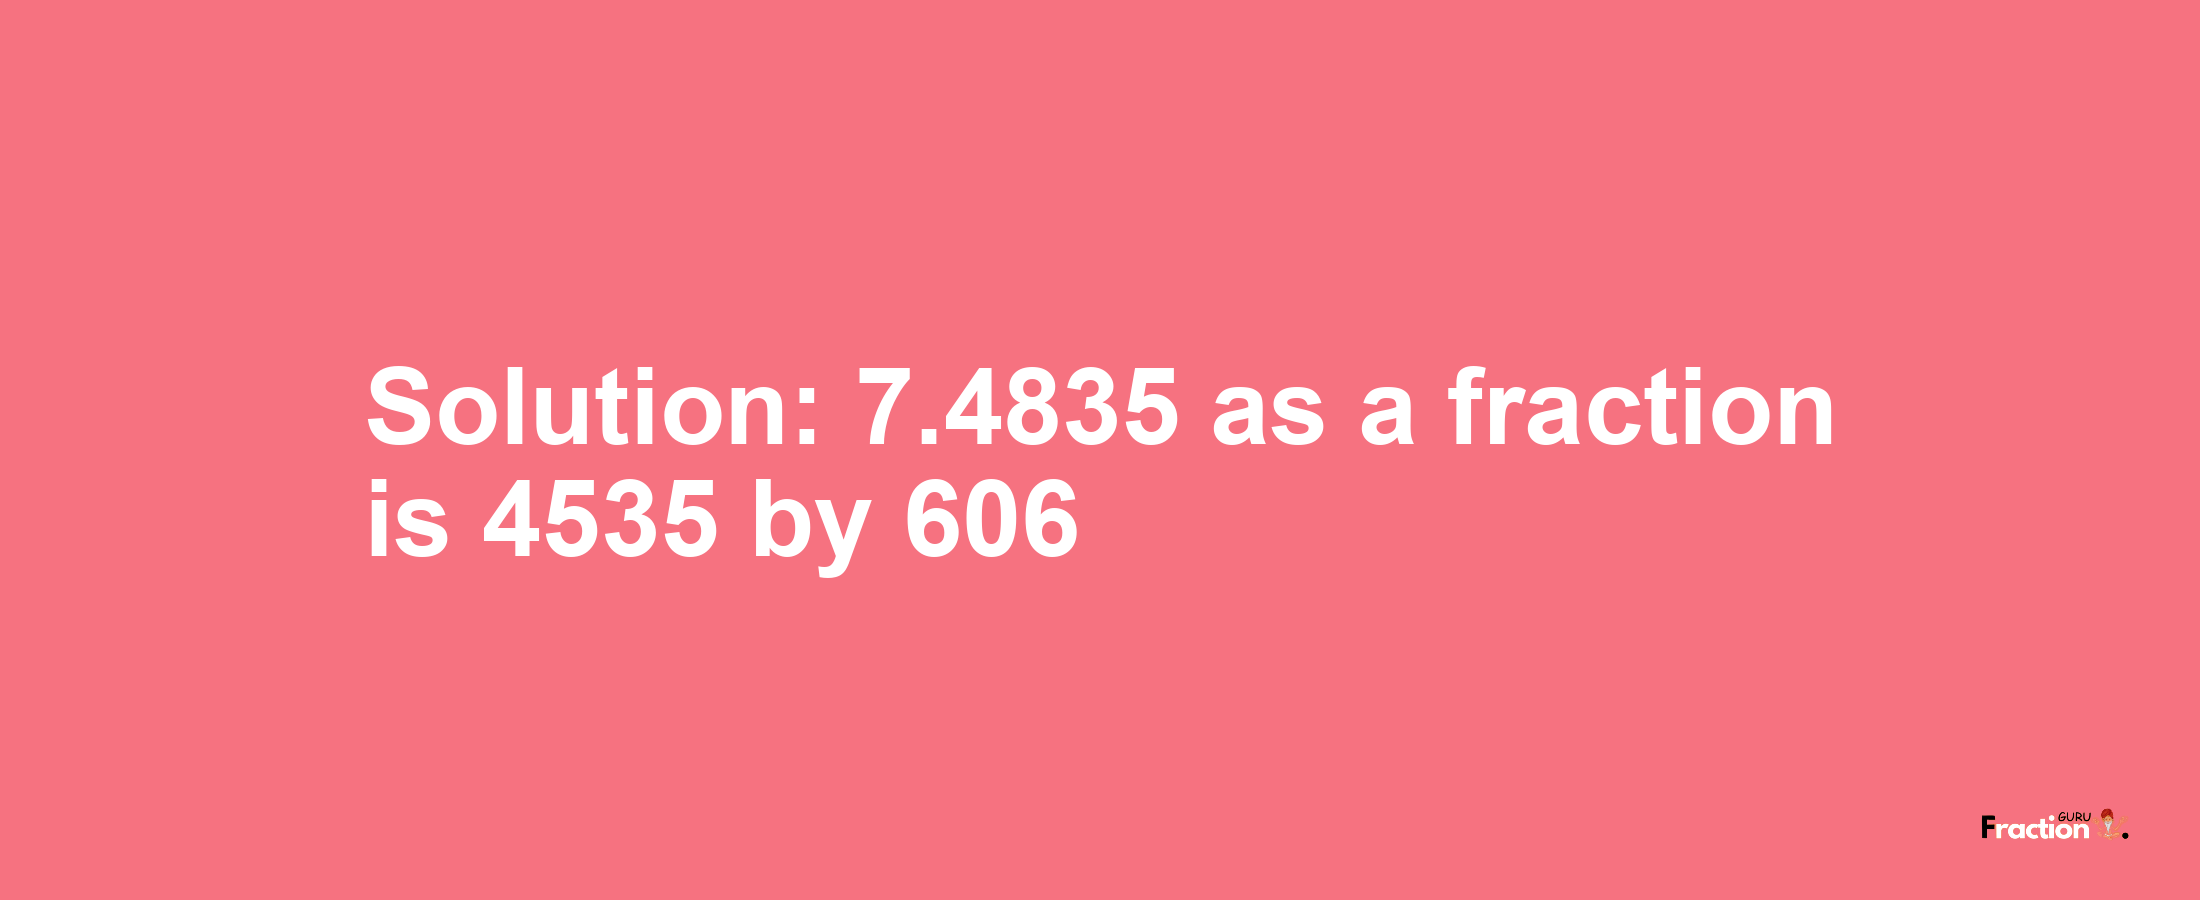 Solution:7.4835 as a fraction is 4535/606